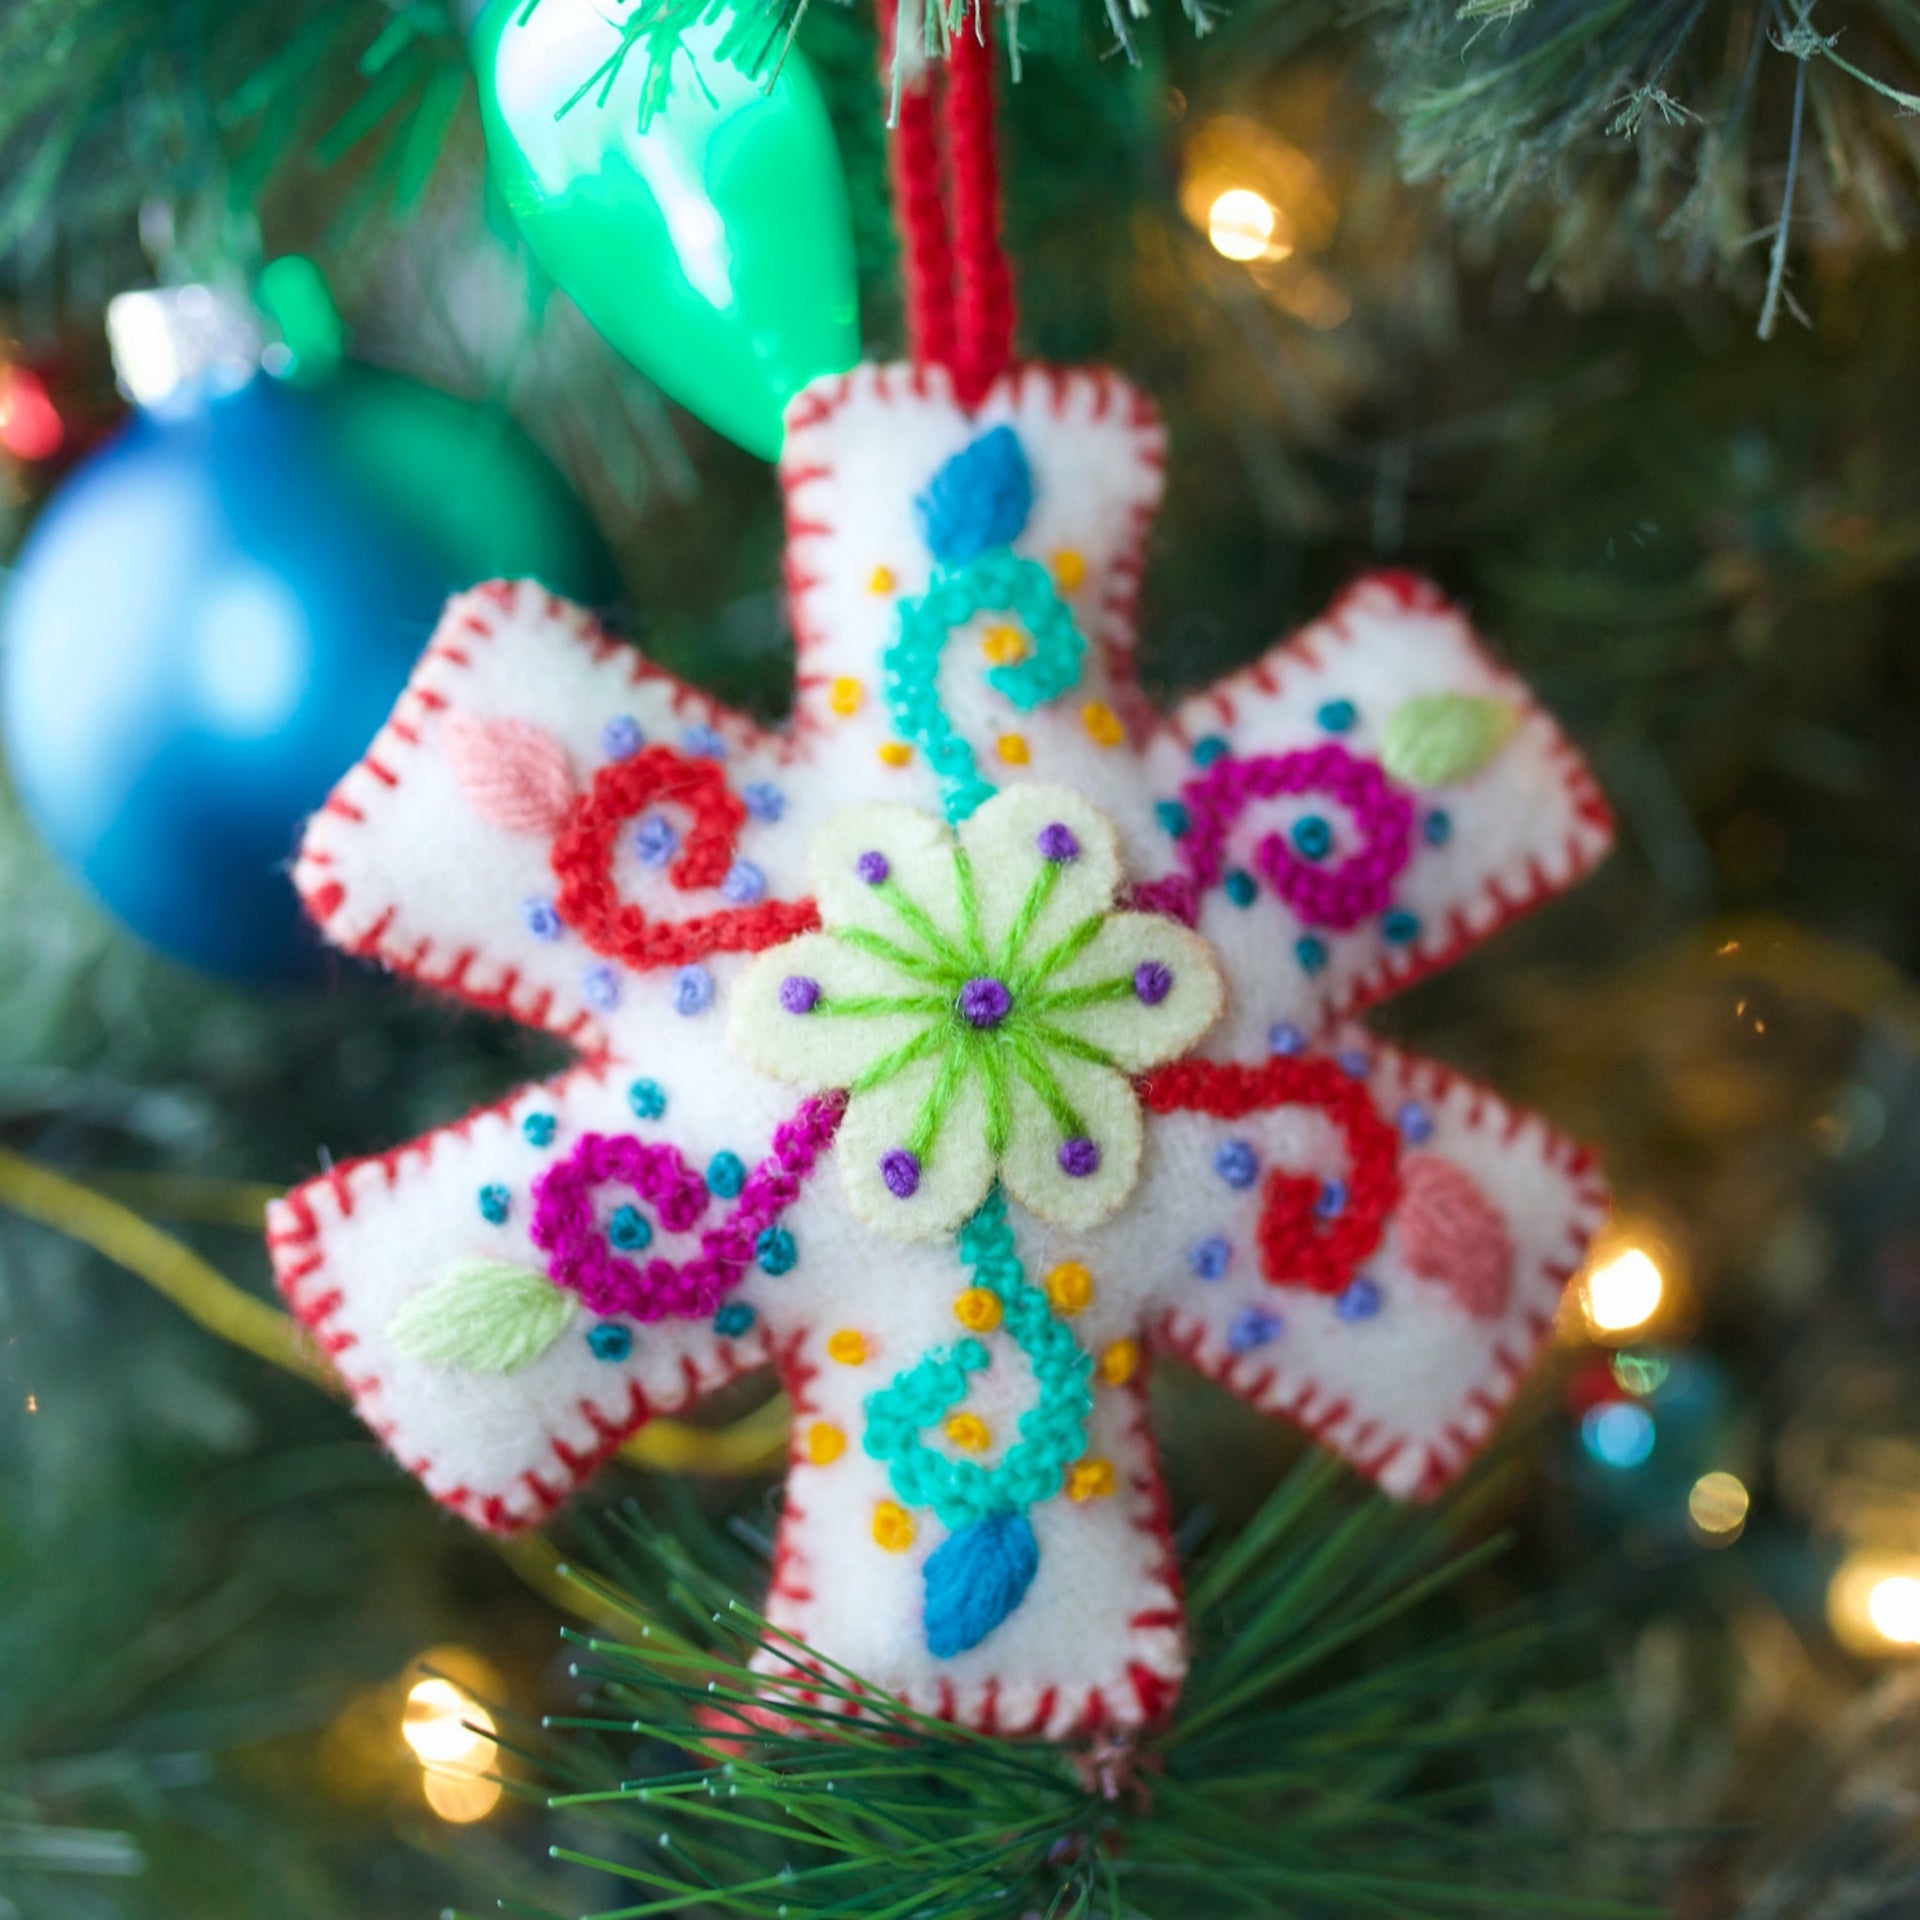 Red Embroidered Snowflake Ornament on Christmas Tree